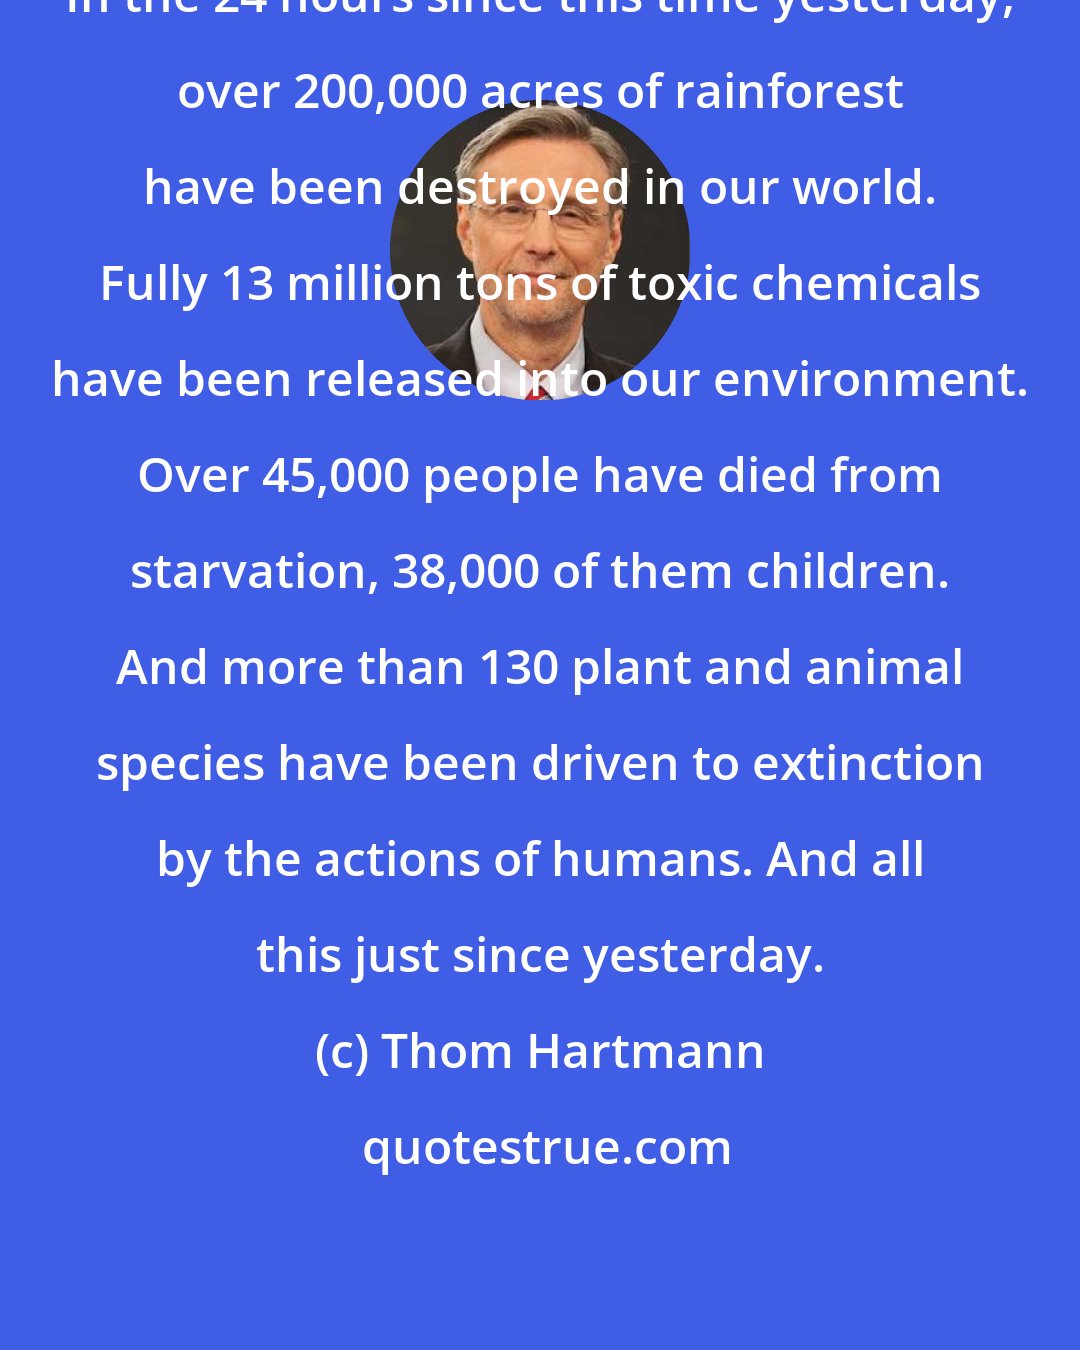 Thom Hartmann: In the 24 hours since this time yesterday, over 200,000 acres of rainforest have been destroyed in our world. Fully 13 million tons of toxic chemicals have been released into our environment. Over 45,000 people have died from starvation, 38,000 of them children. And more than 130 plant and animal species have been driven to extinction by the actions of humans. And all this just since yesterday.